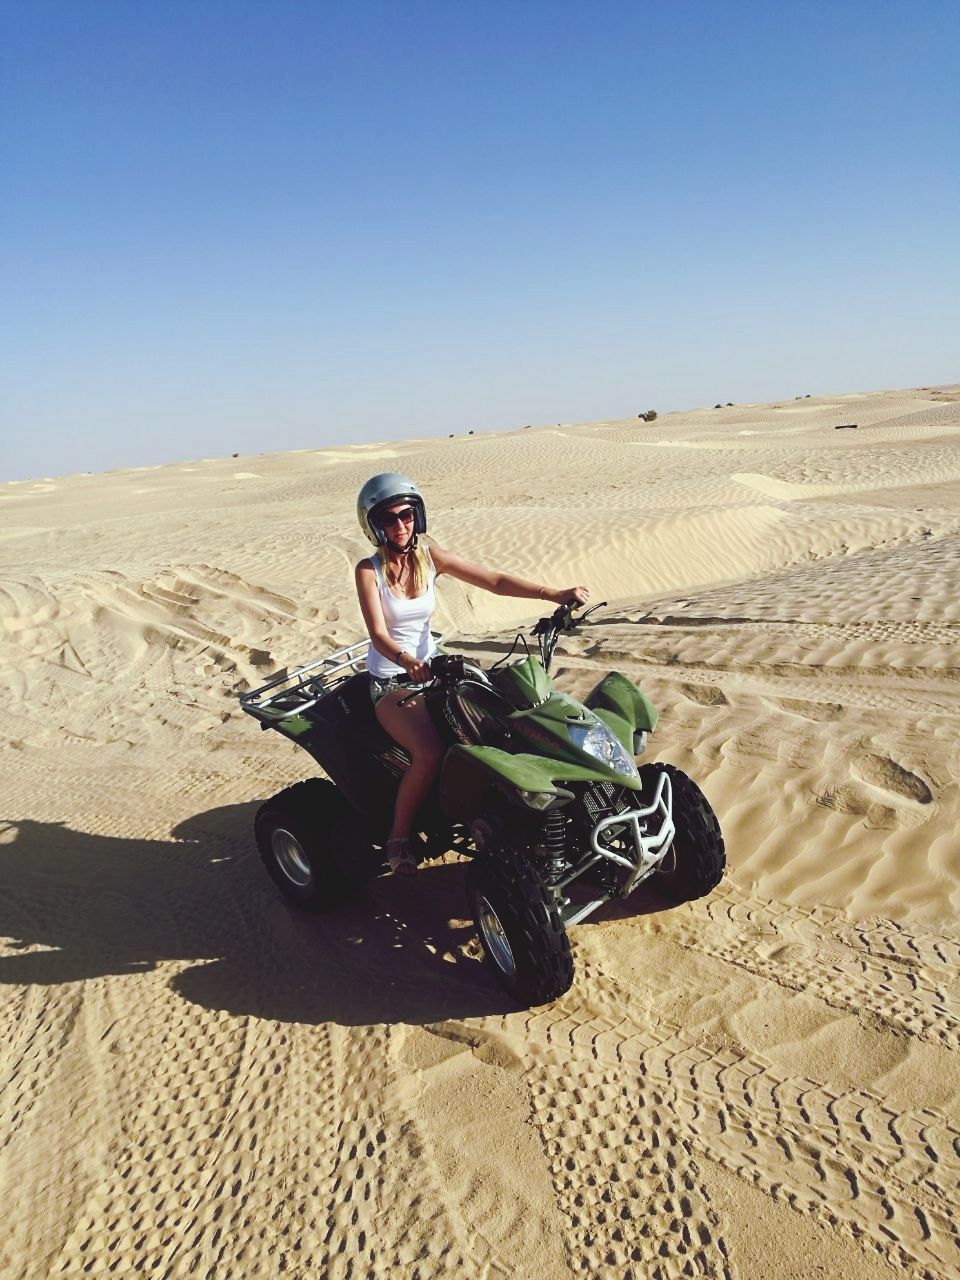 YOUNG WOMAN RIDING MOTORCYCLE IN DESERT